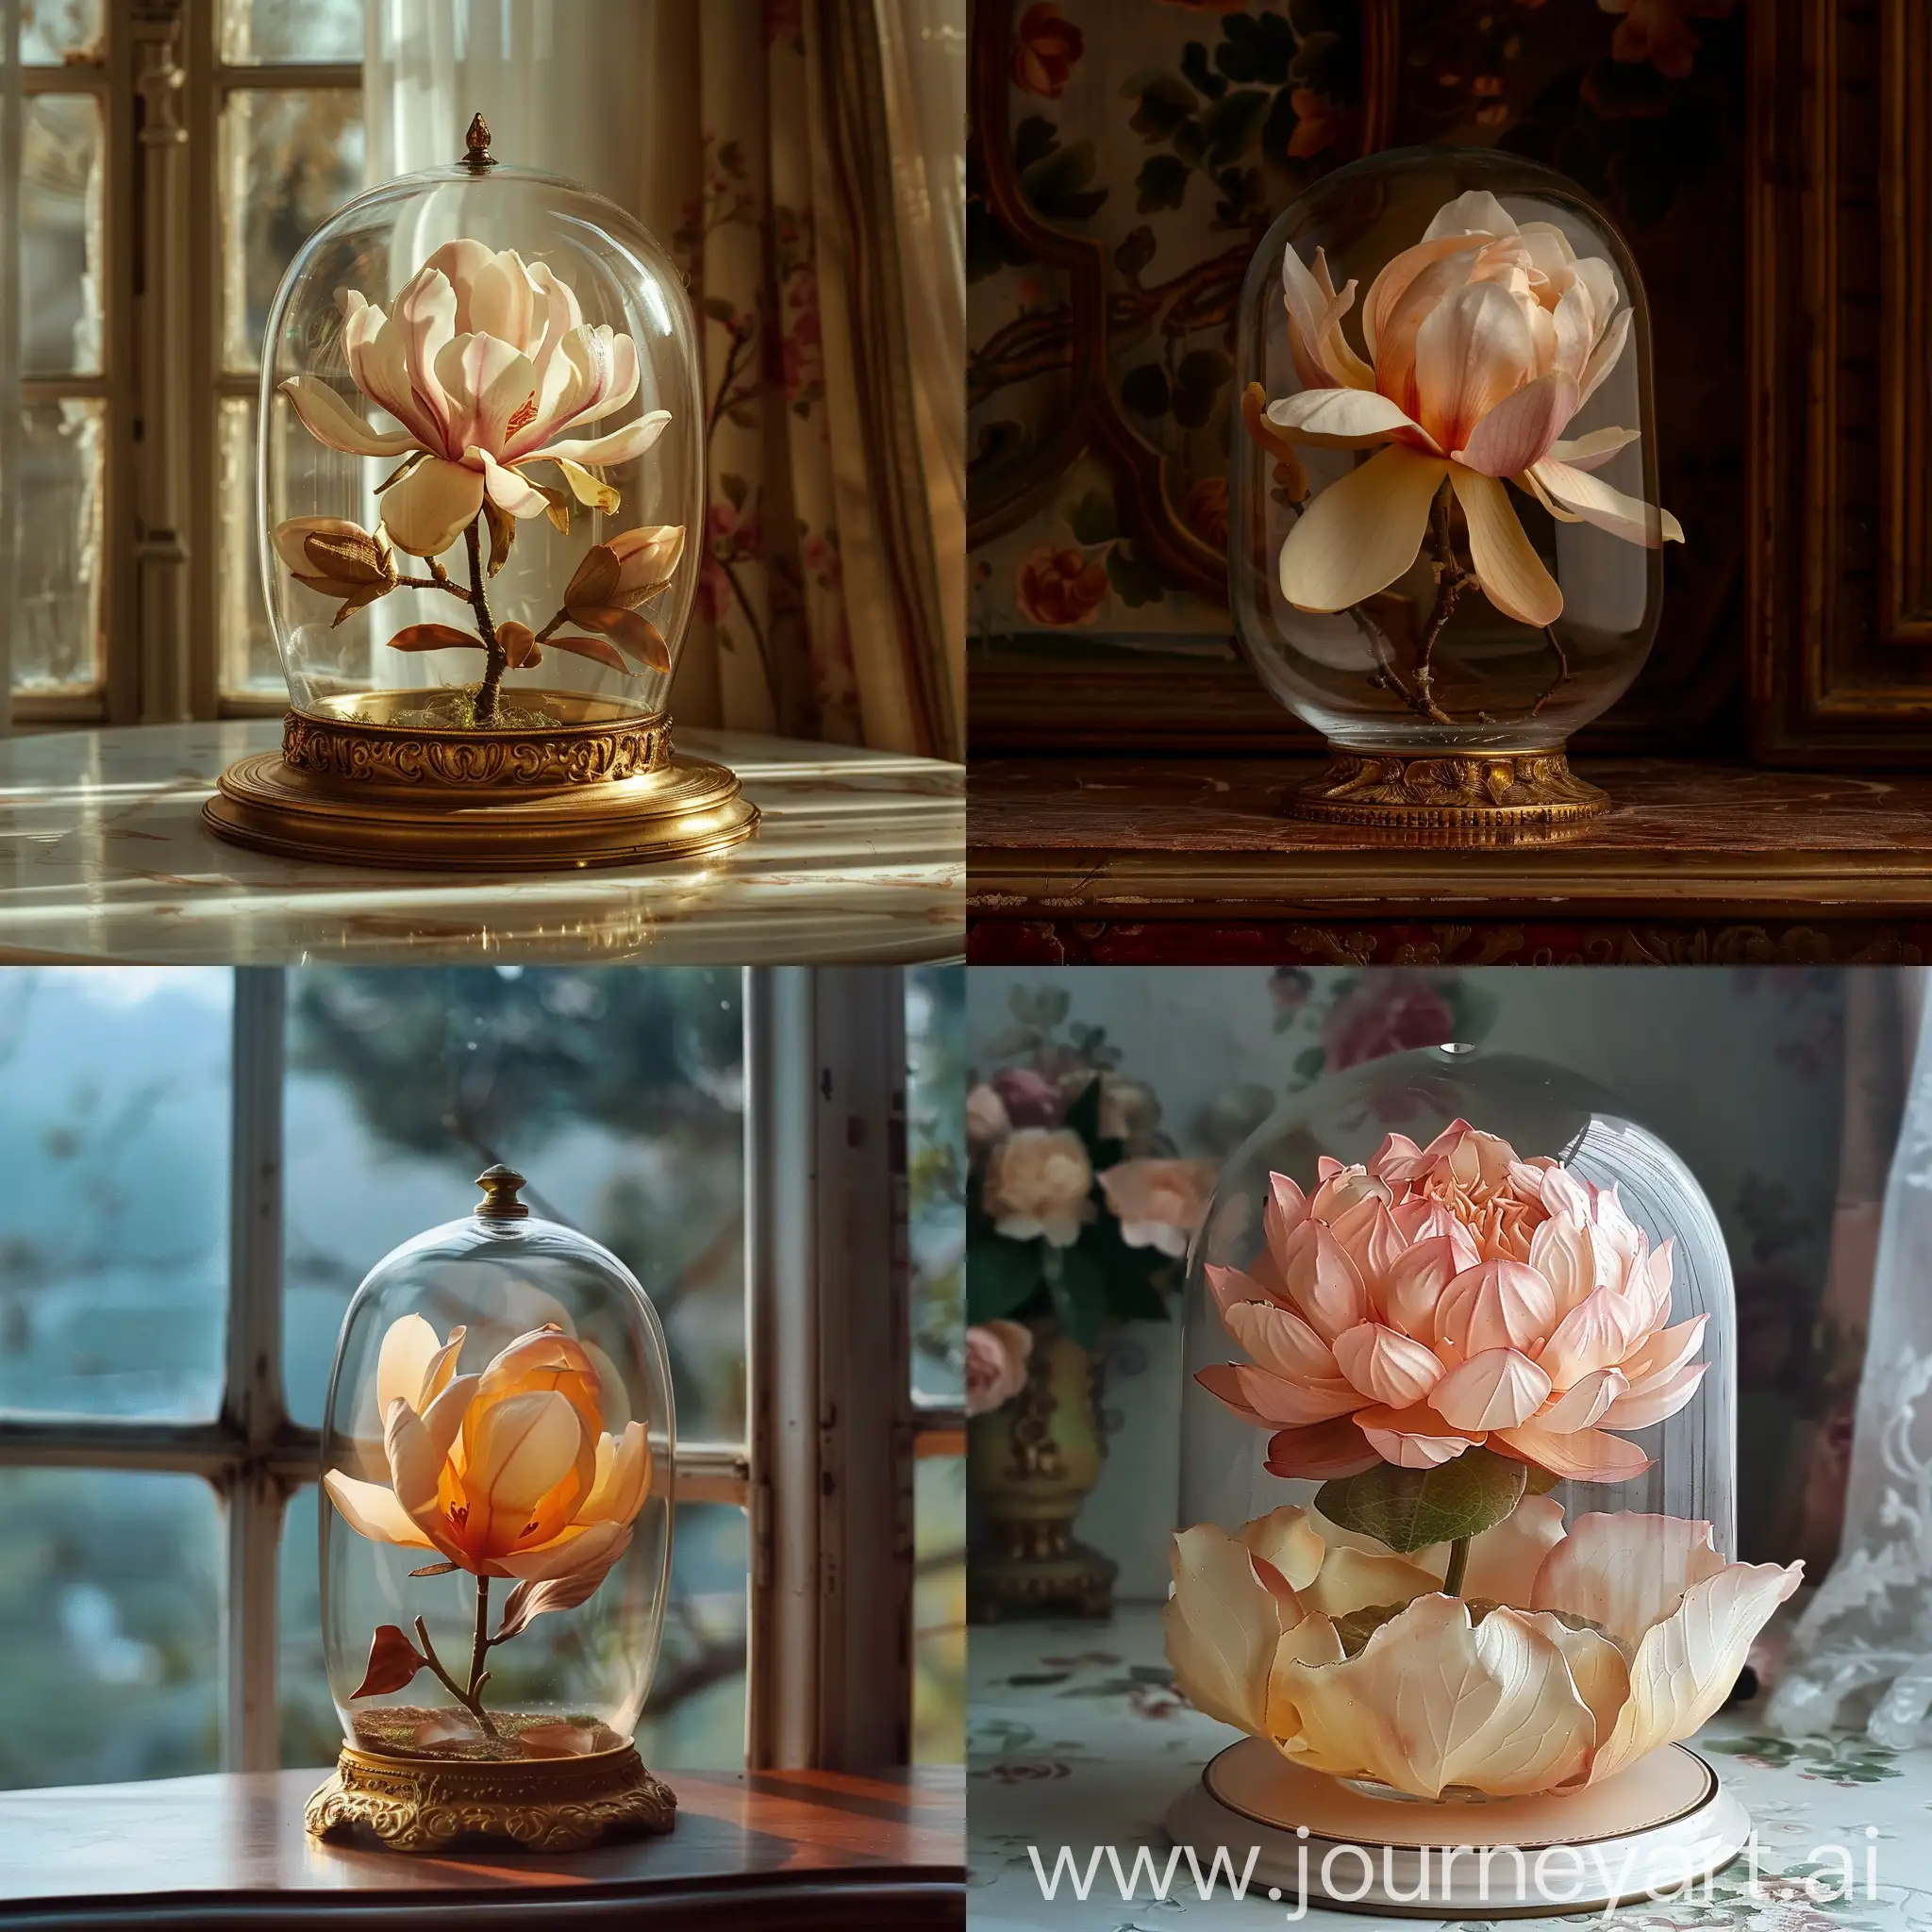 Real and very eye-catching photo of a very beautiful and attractive flower grown in a dome-shaped glass (medium glass size) with a beautiful base, the flower inside the glass is a little smaller than the glass, matte background in a beautiful royal house, morning , masterpiece, beauty in every sense, very realistic, many details, professional photography, (real), dreamy, flowers and glass like the movie Devil and Lovely